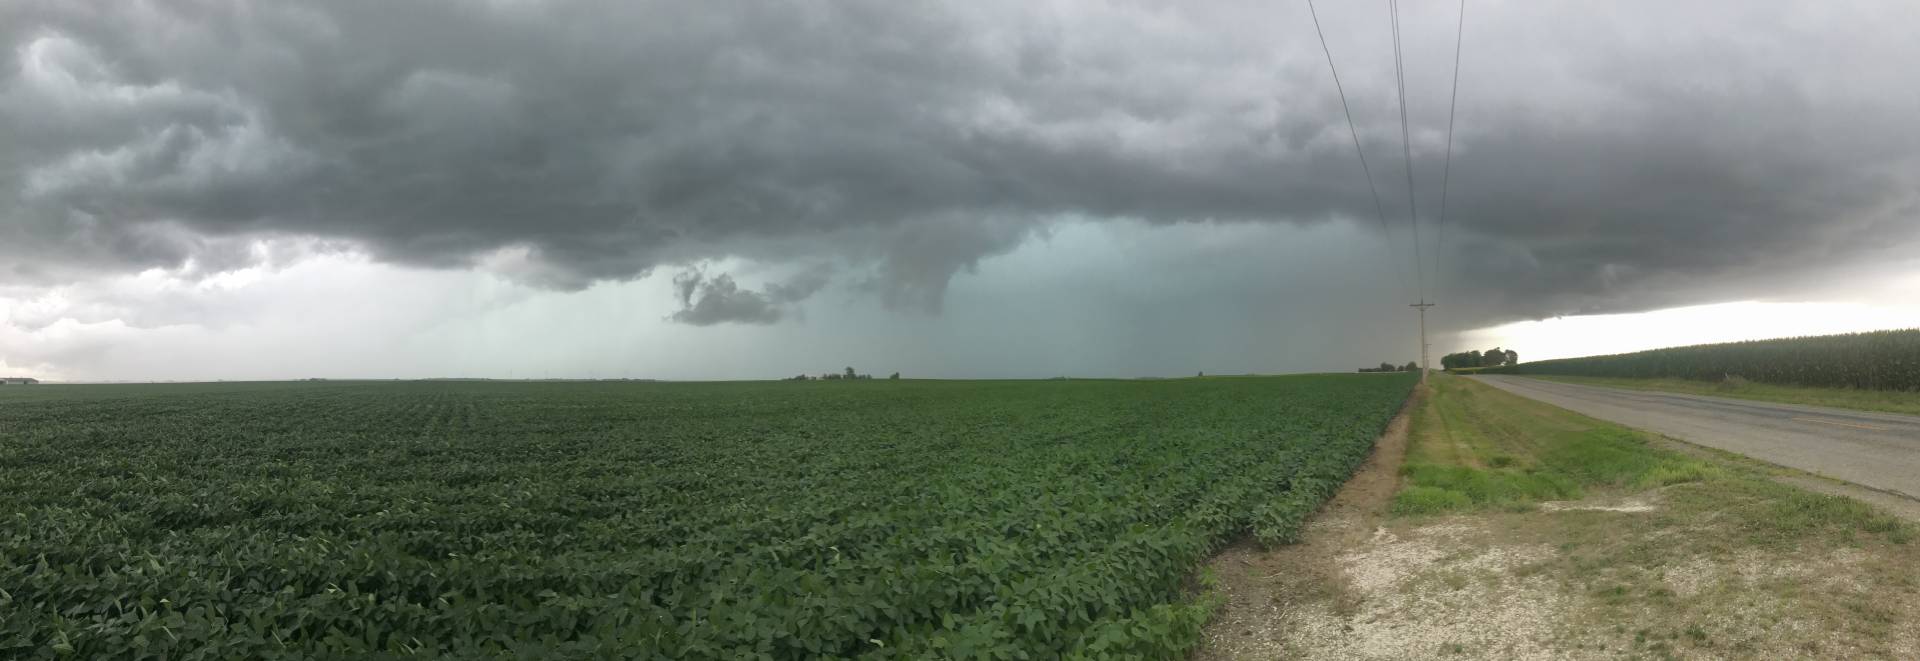 pano of this HP supercell near Arrowsmith, IL  #ilwx